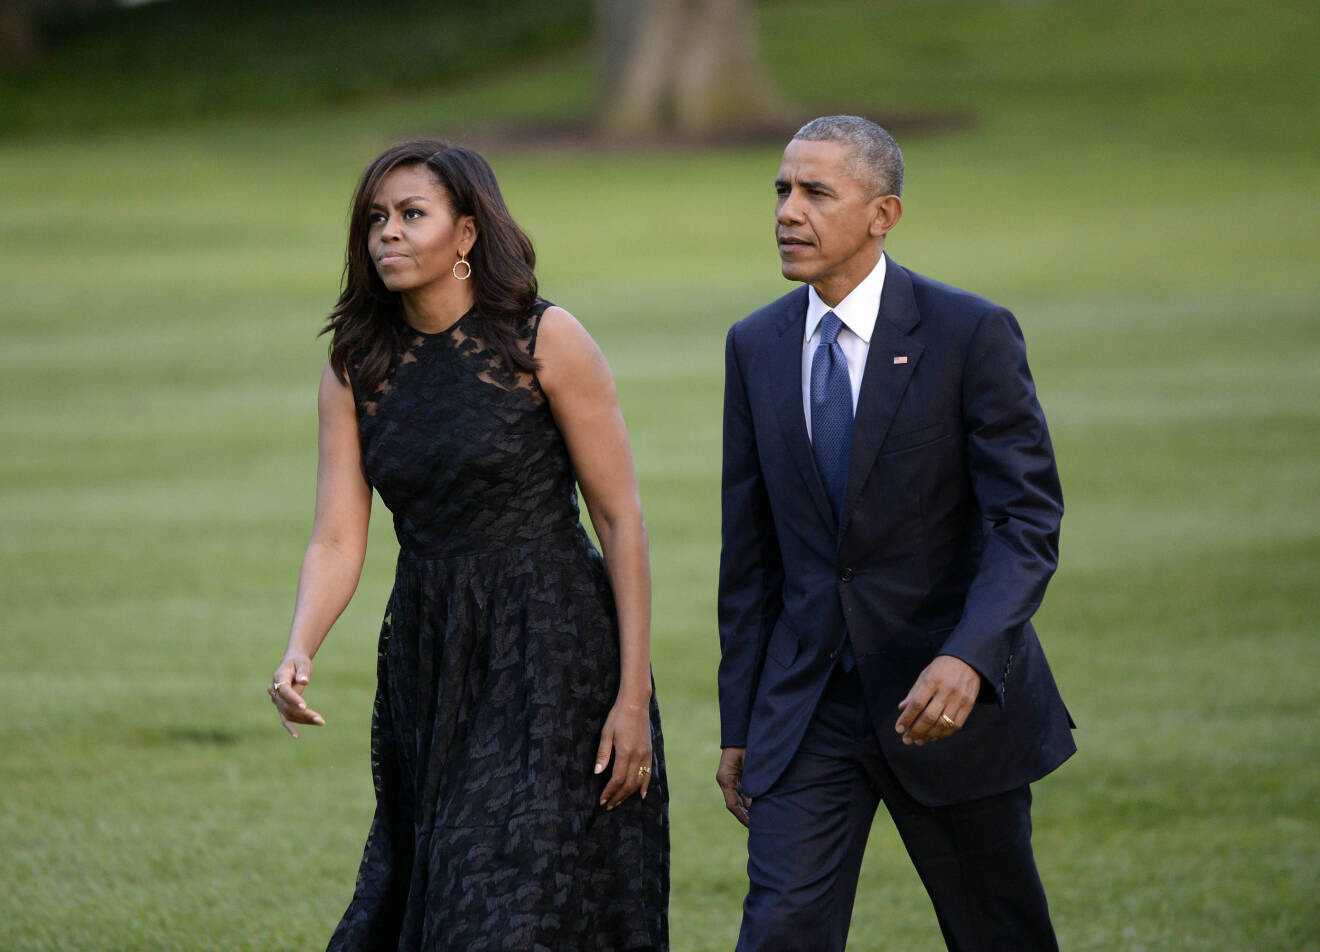 First Lady Michelle Obama and President Barack Obama returns to the White House after arriving with Marine One on July 12, 2016 in Washington, DC, USA. The Obamas attended an interfaith service with the families of the fallen police officers and members of the Dallas community. Photo by Olivier Douliery/ABACAPRESS.COM (c) Abaca USA / IBL